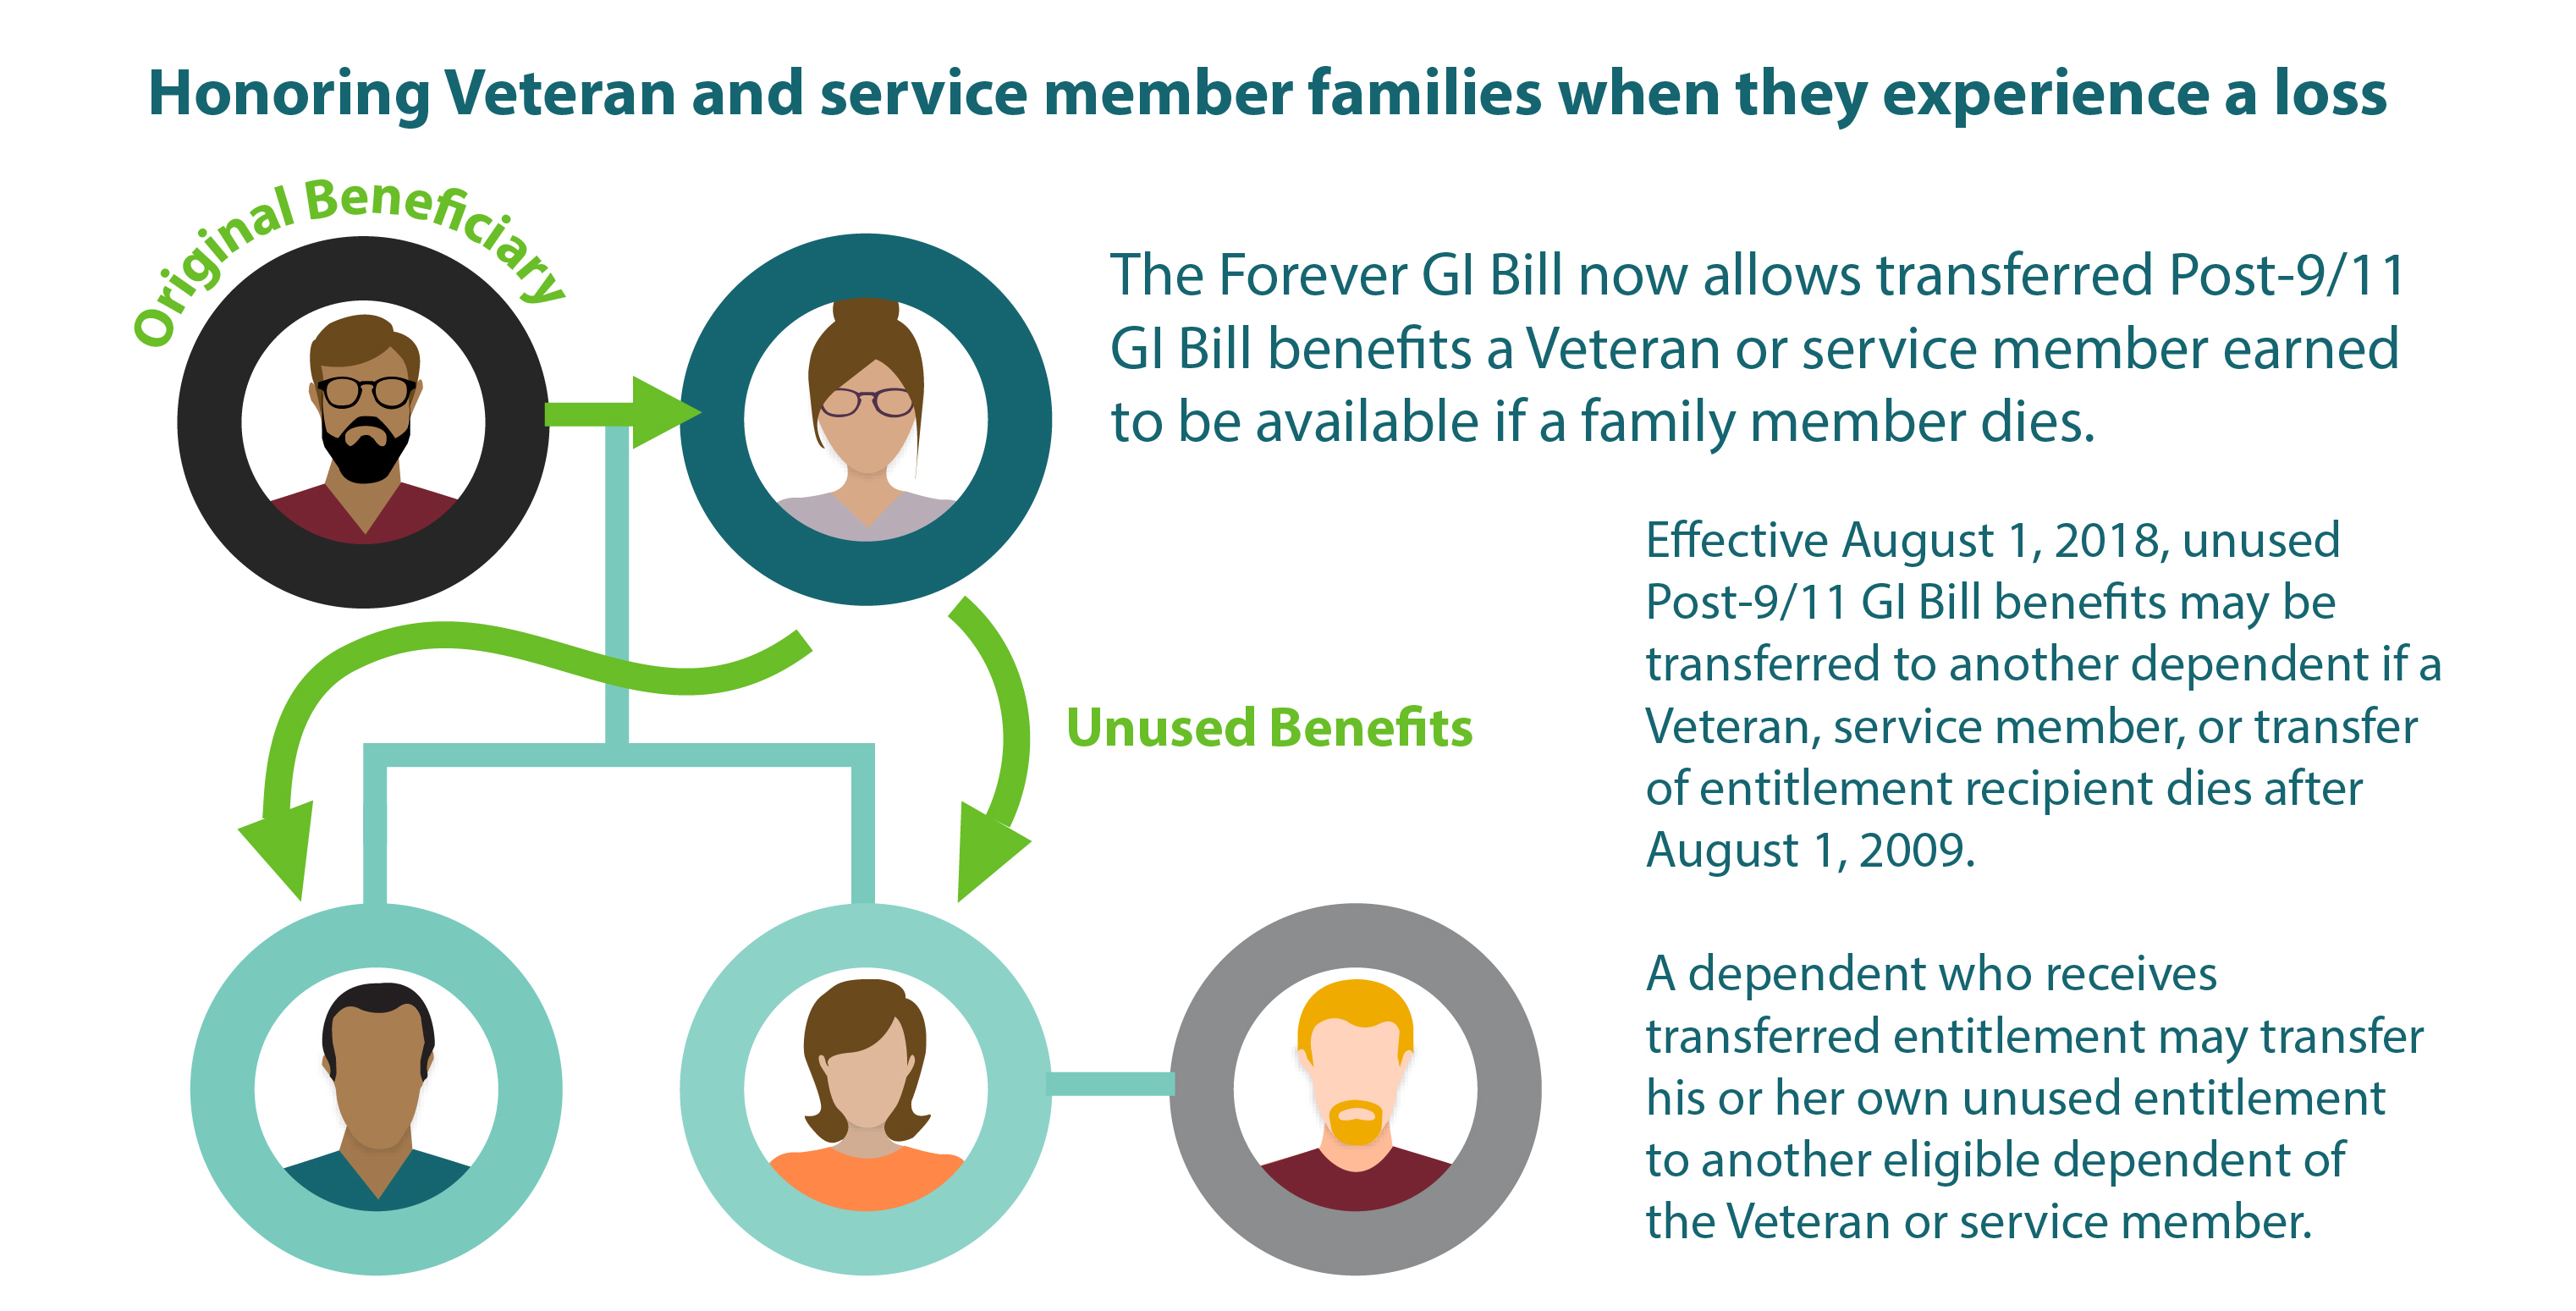 Honoring Veteran and service member families when they experience a loss.  The Forever GI Bill now allows transferred Post 9/11 GI Bill benefits a Veteran or service member earned to be available if a family member dies.